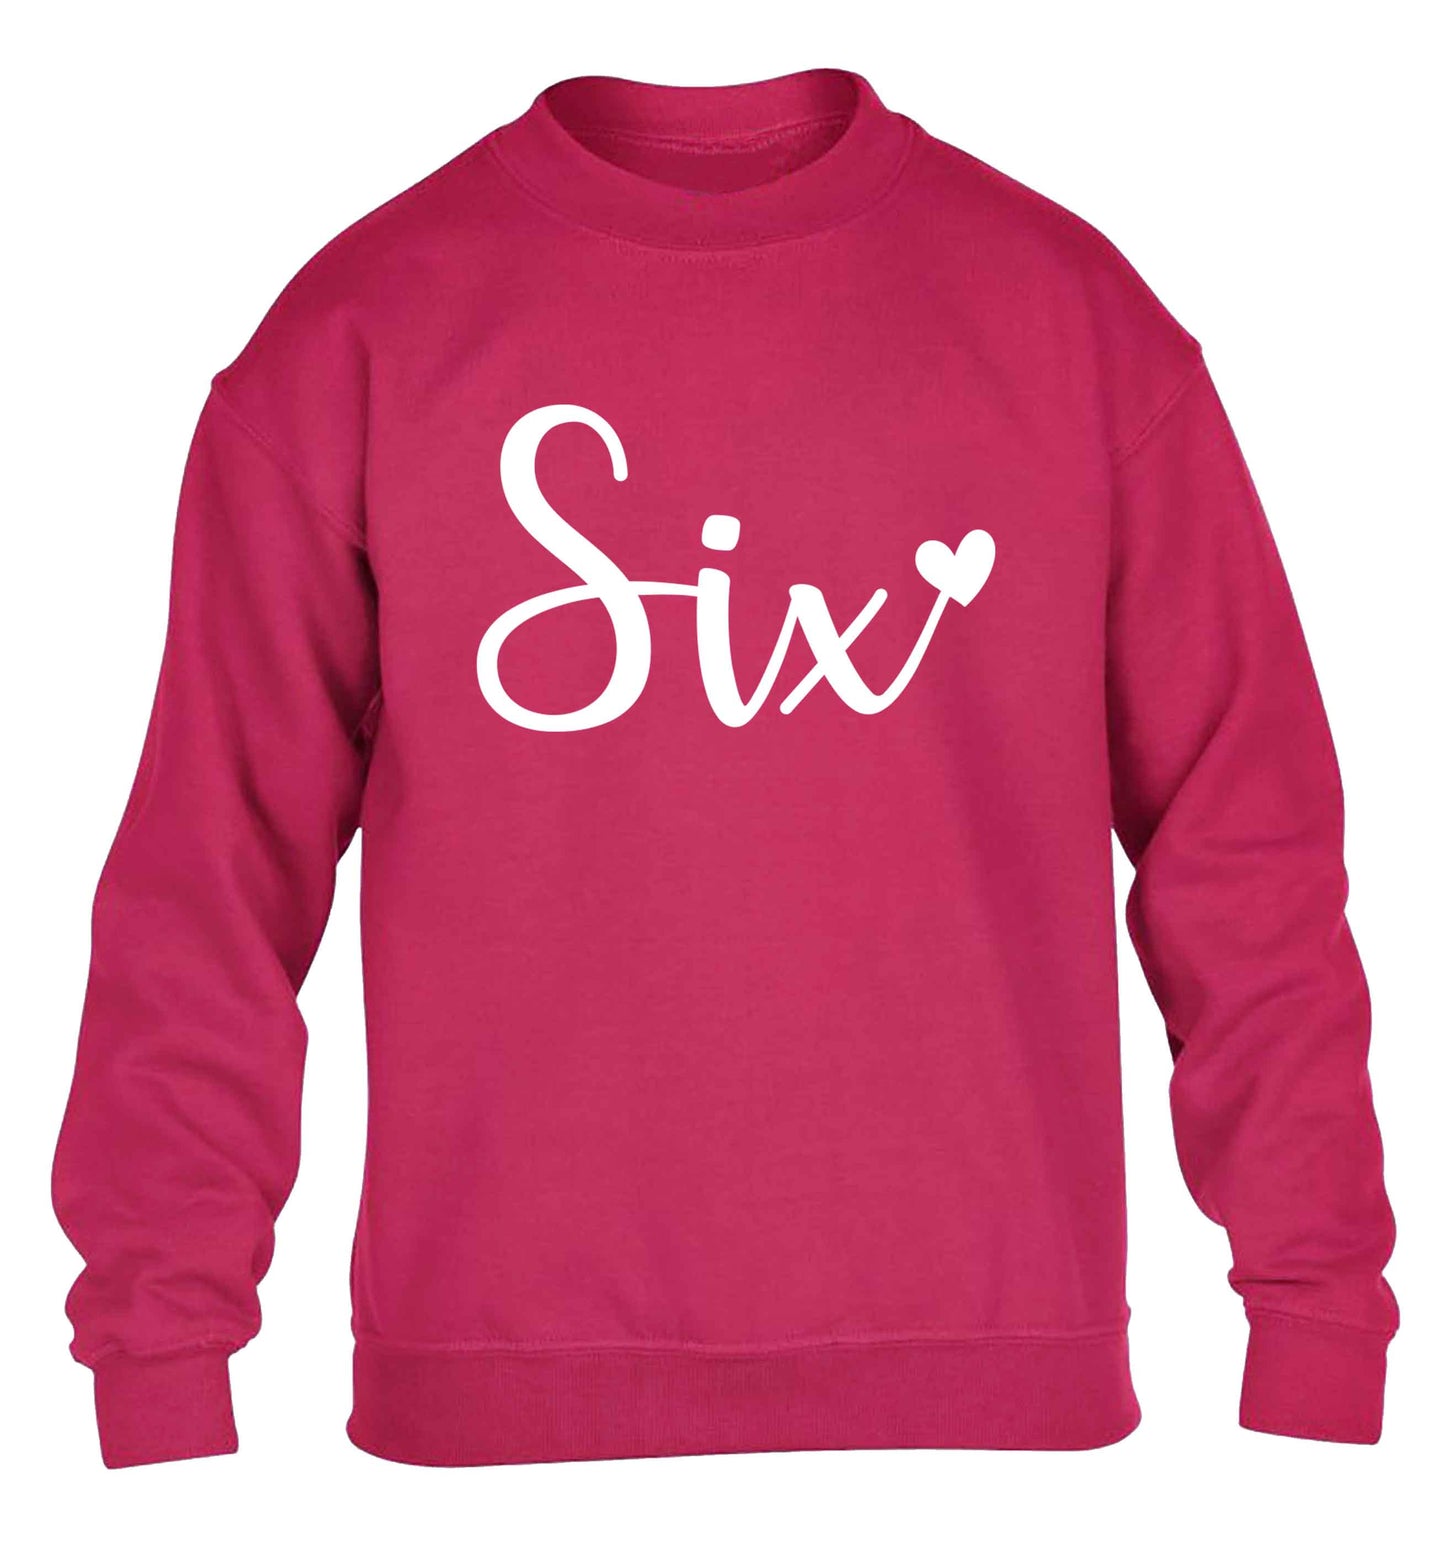 Six and heart! children's pink sweater 12-13 Years